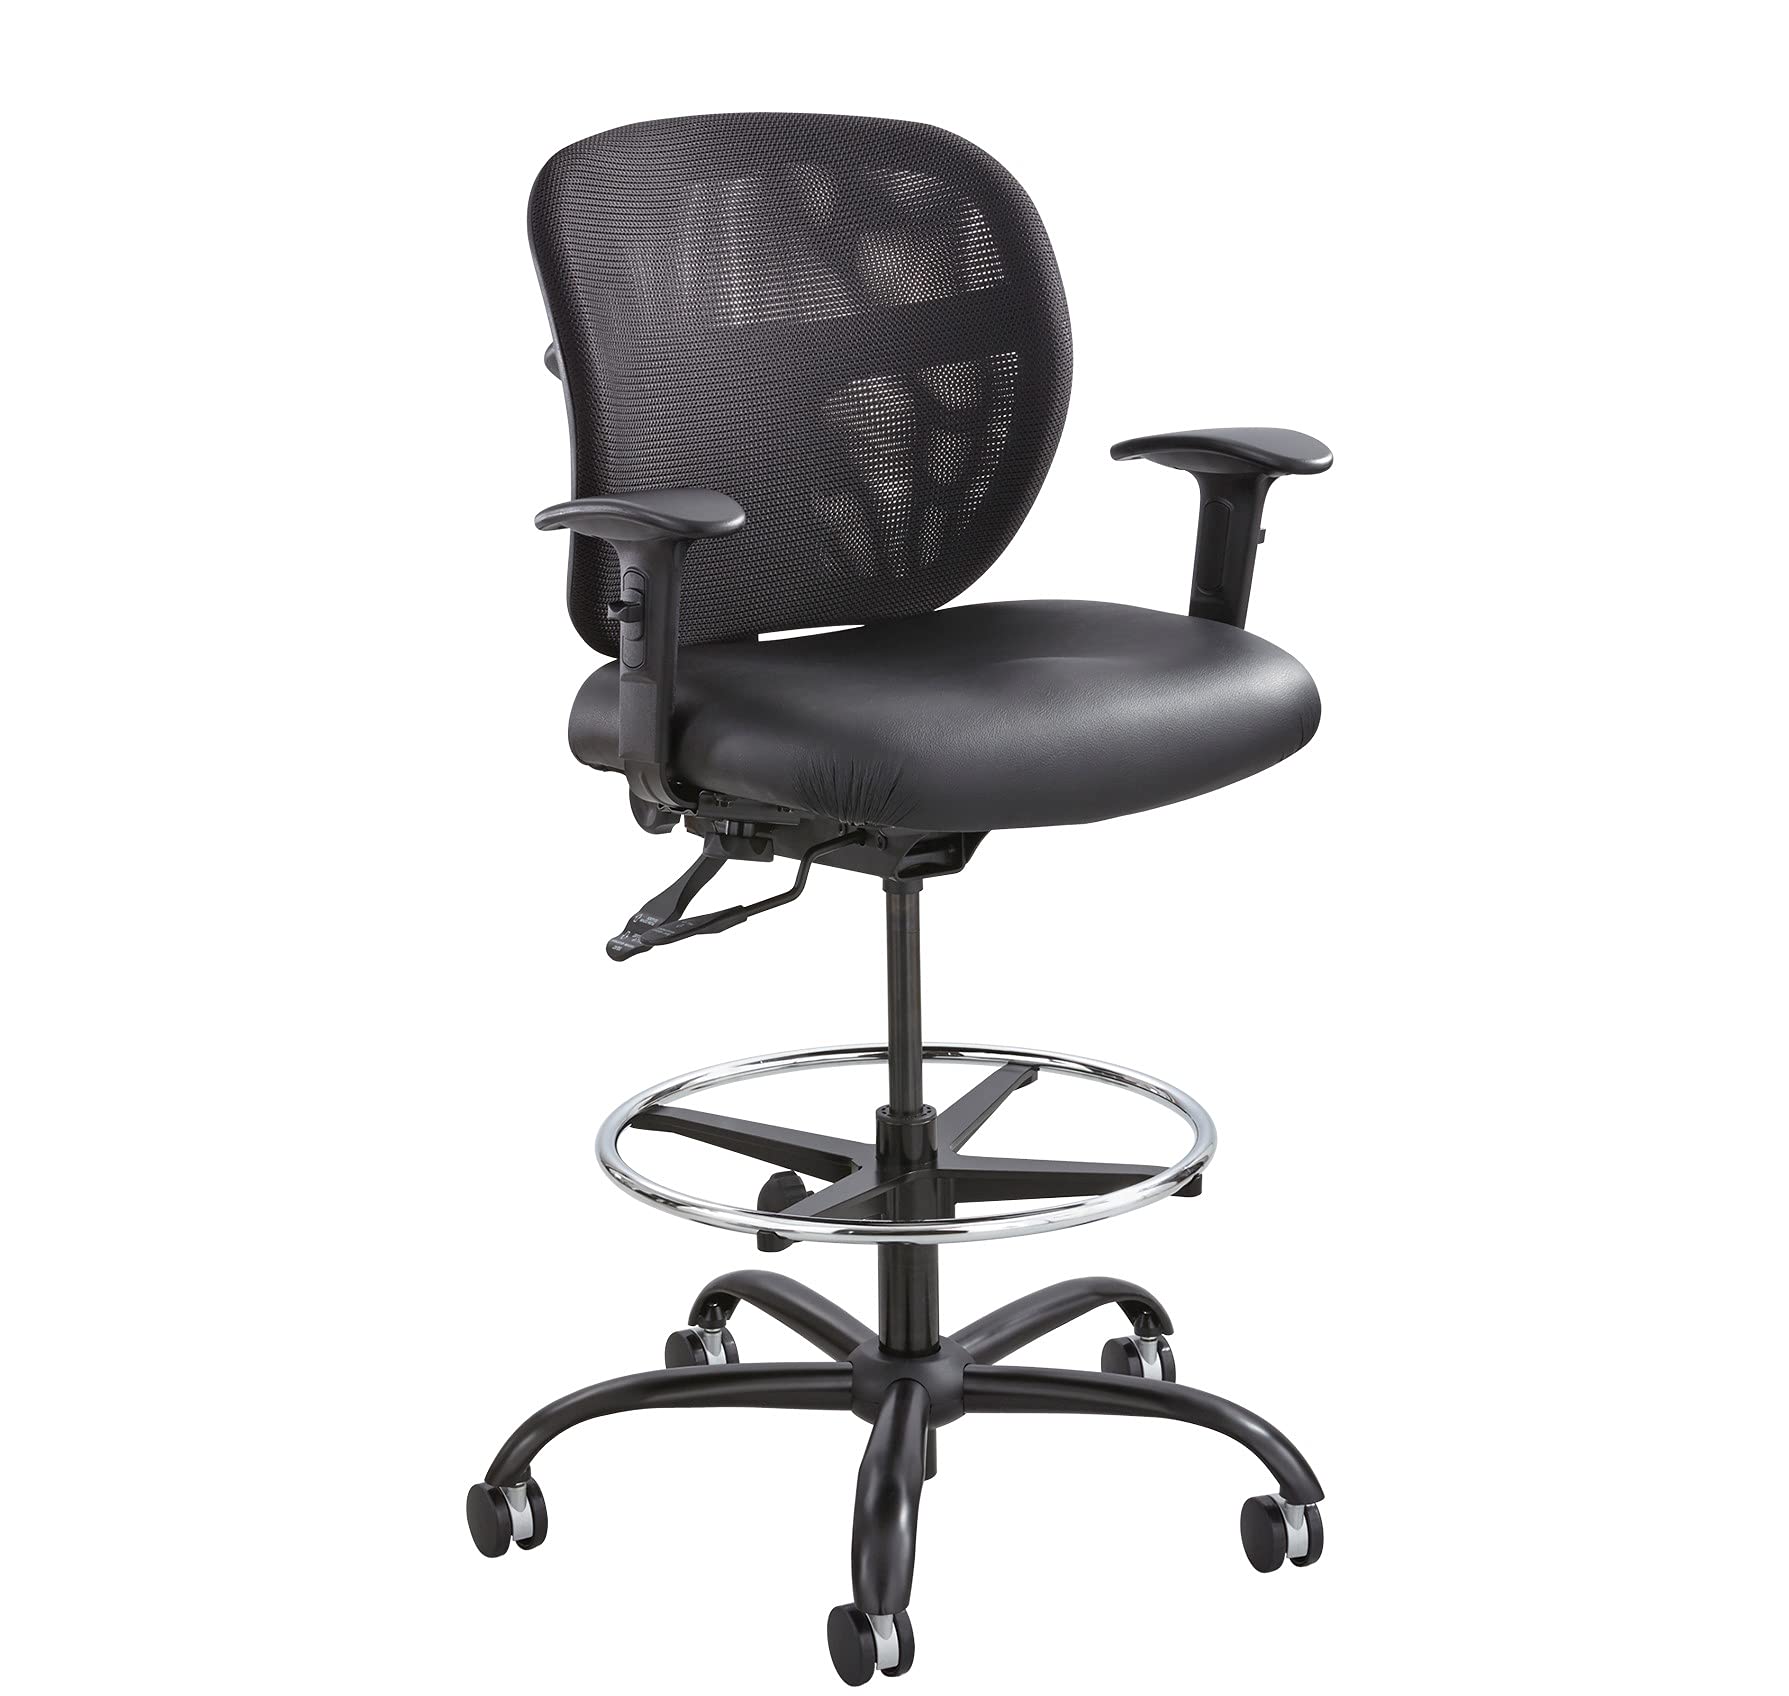 Safco Products Vue Heavy Duty Stool 3394BV, Black Vinyl, Rated for 24/7 Use, Holds up to 350 lbs. (SAF3394BV)